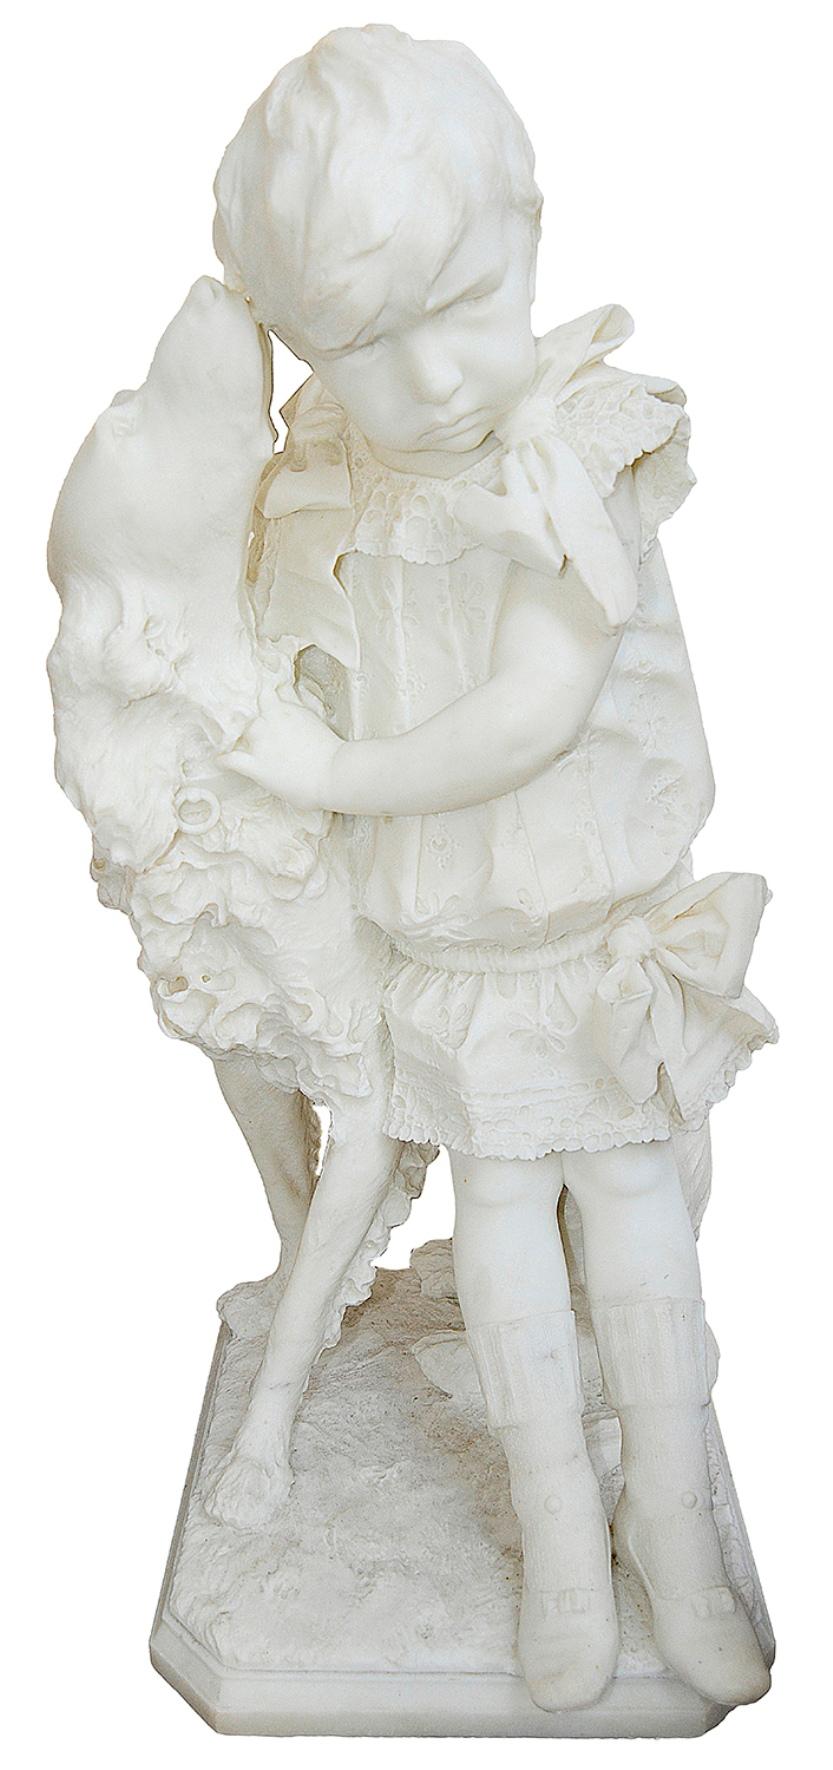 A fine quality 19th century marble statue of a young boy sitting with his dog, mounted on a Green marble pedestal. Measures: 174cm(68.5